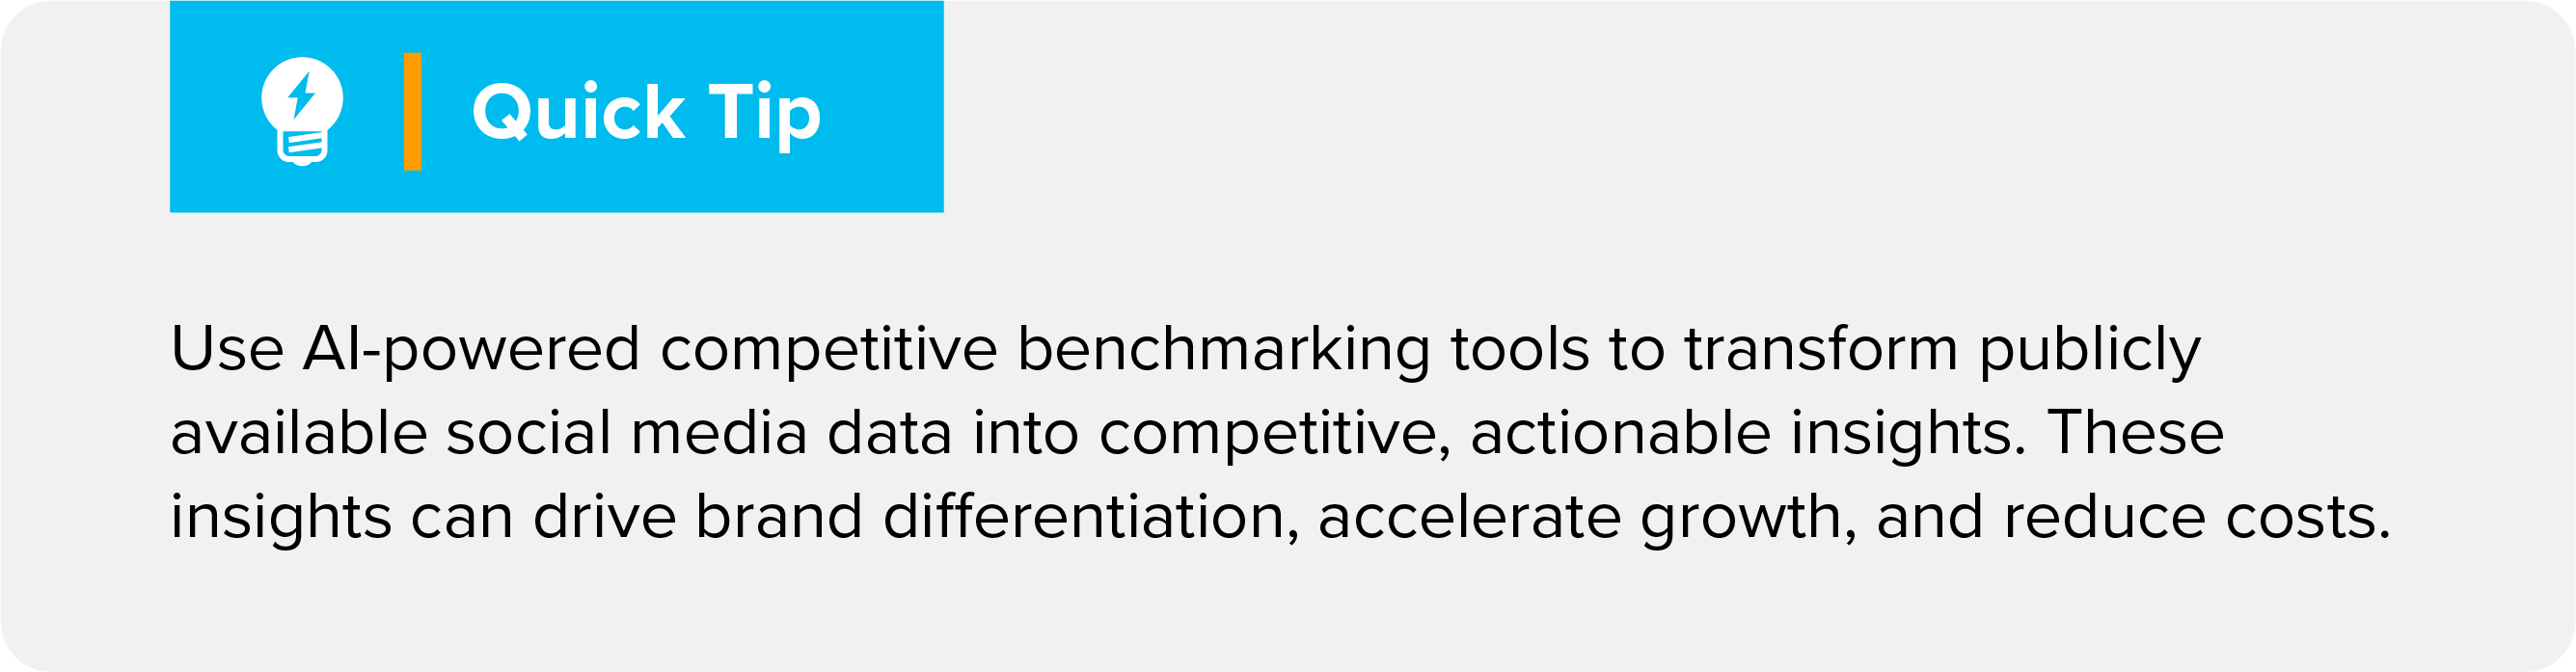 AI-powered competitive benchmarking can provide differentiation, accelerate growth, and reduce costs.